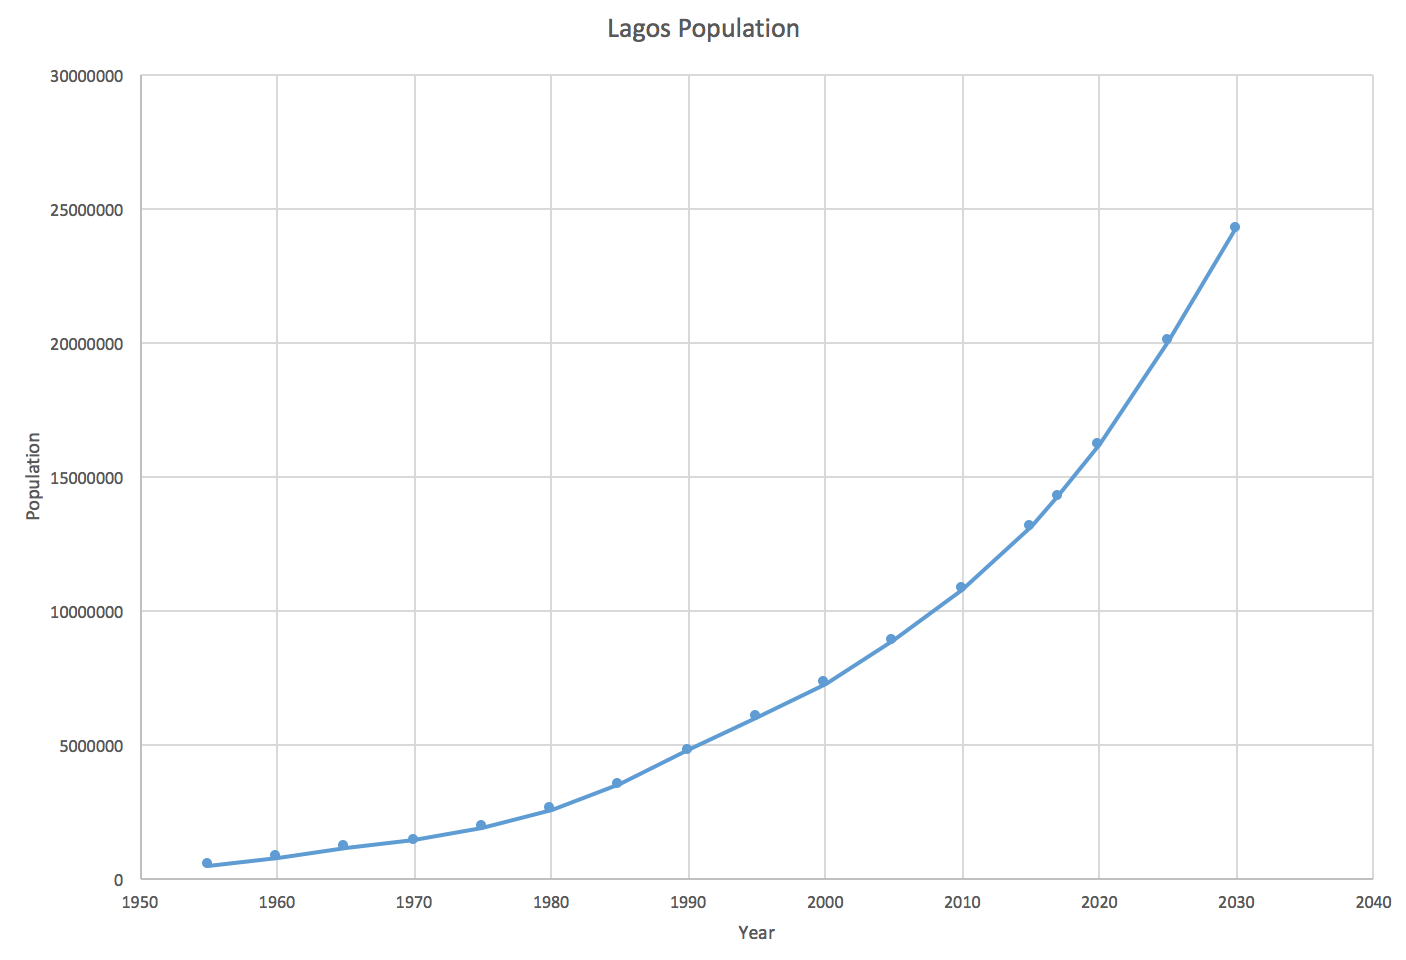 Population growth in Lagos